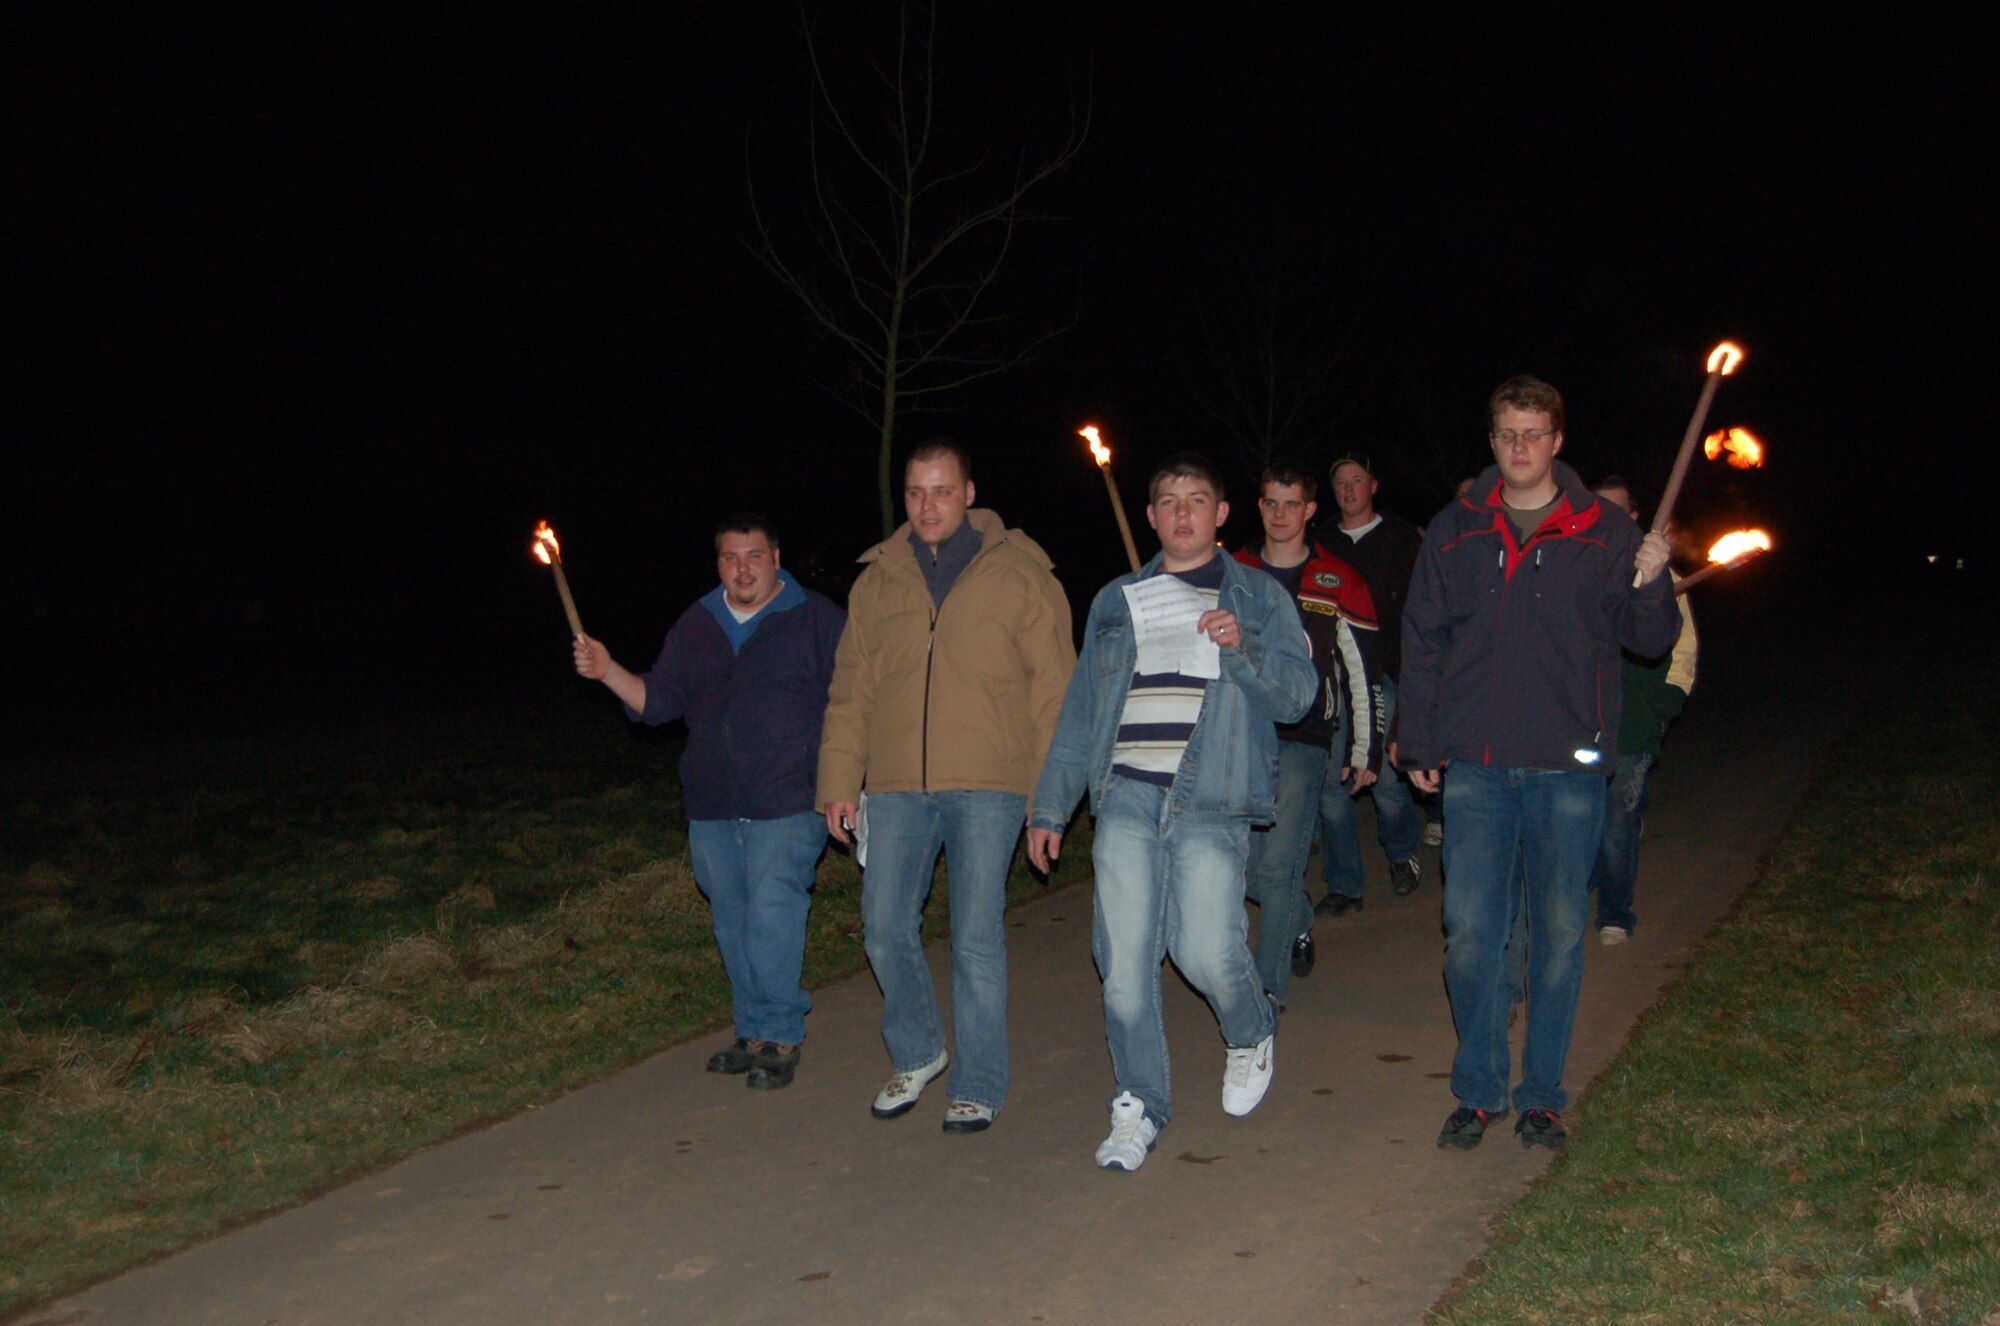 PREISTS, Germany-- A group of young people from Preist, a community located outside of Spangdahlem, arrive at the bonfire area with torch lights. This group was responsible for lighting the big bonfire. The old tradition of lighting bonfires has been carried on by the people of the Eifel for many generations. It signifies the end of winter.  (U.S. Air Force Photo/Iris Reiff)